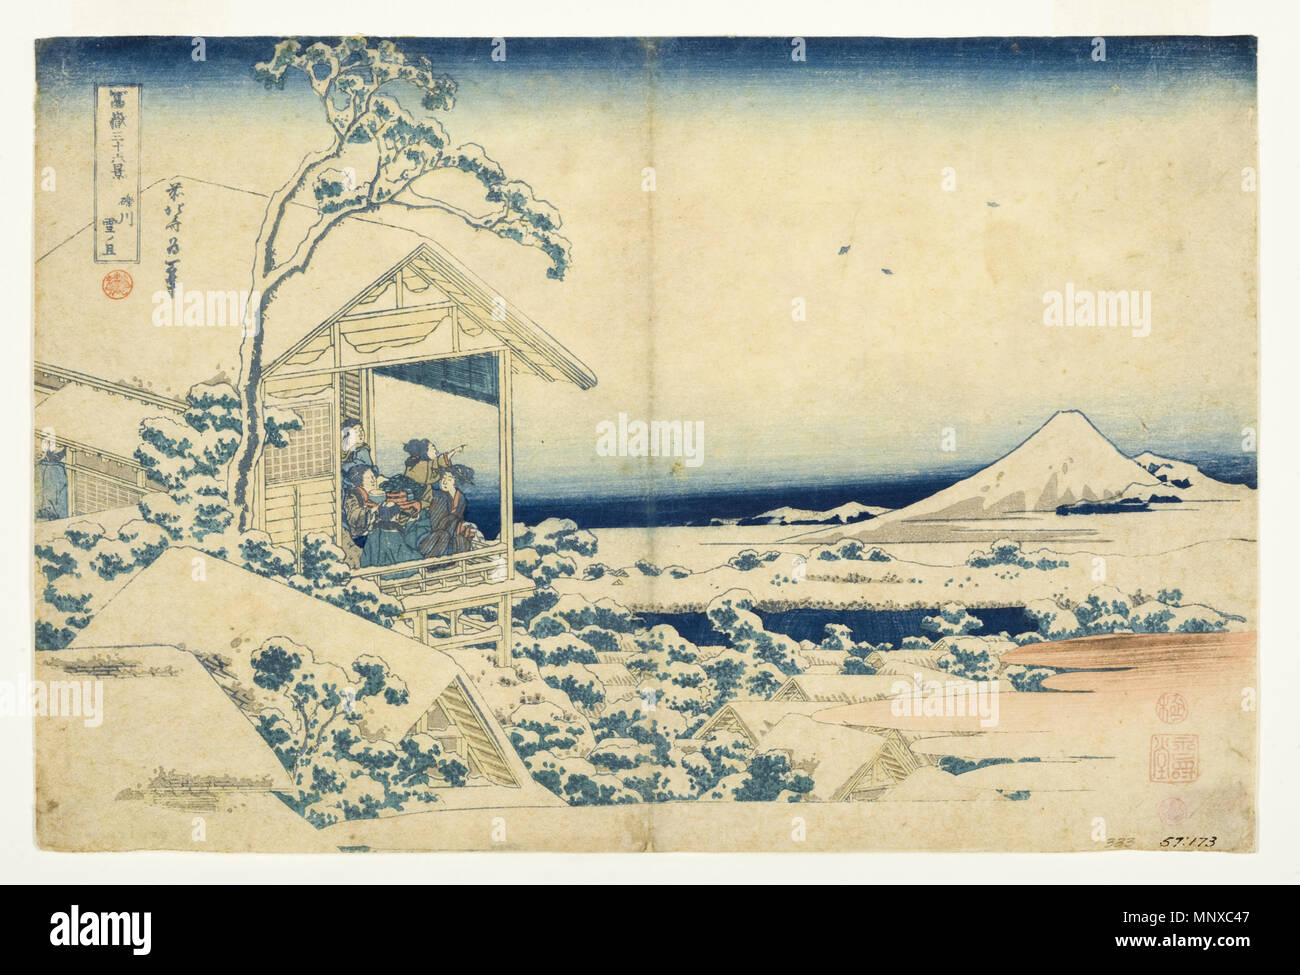 . English: Accession Number: 1957.173 Display Artist: Katsushika Hokusai Display Title: Snowy Morning at Koishikawa Series Title: Thirty-six Views of Mount Fuji Suite Name: Fugaku sanjurokkei Creation Date: ca. 1831-1834 Height: 9 3/4 in. Width: 14 1/2 in. Display Dimensions: 9 3/4 in. x 14 1/2 in. (24.77 cm x 36.83 cm) Publisher: Nishimuraya Yohachi Credit Line: Bequest of Mrs. Cora Timken Burnett Label Copy: 'The subdued palette and nostalgic landscape scenes of the artist Kiyochika catered more to a western market interested in acquiring scenes of Japan similar to works by Hiroshige (179818 Stock Photo